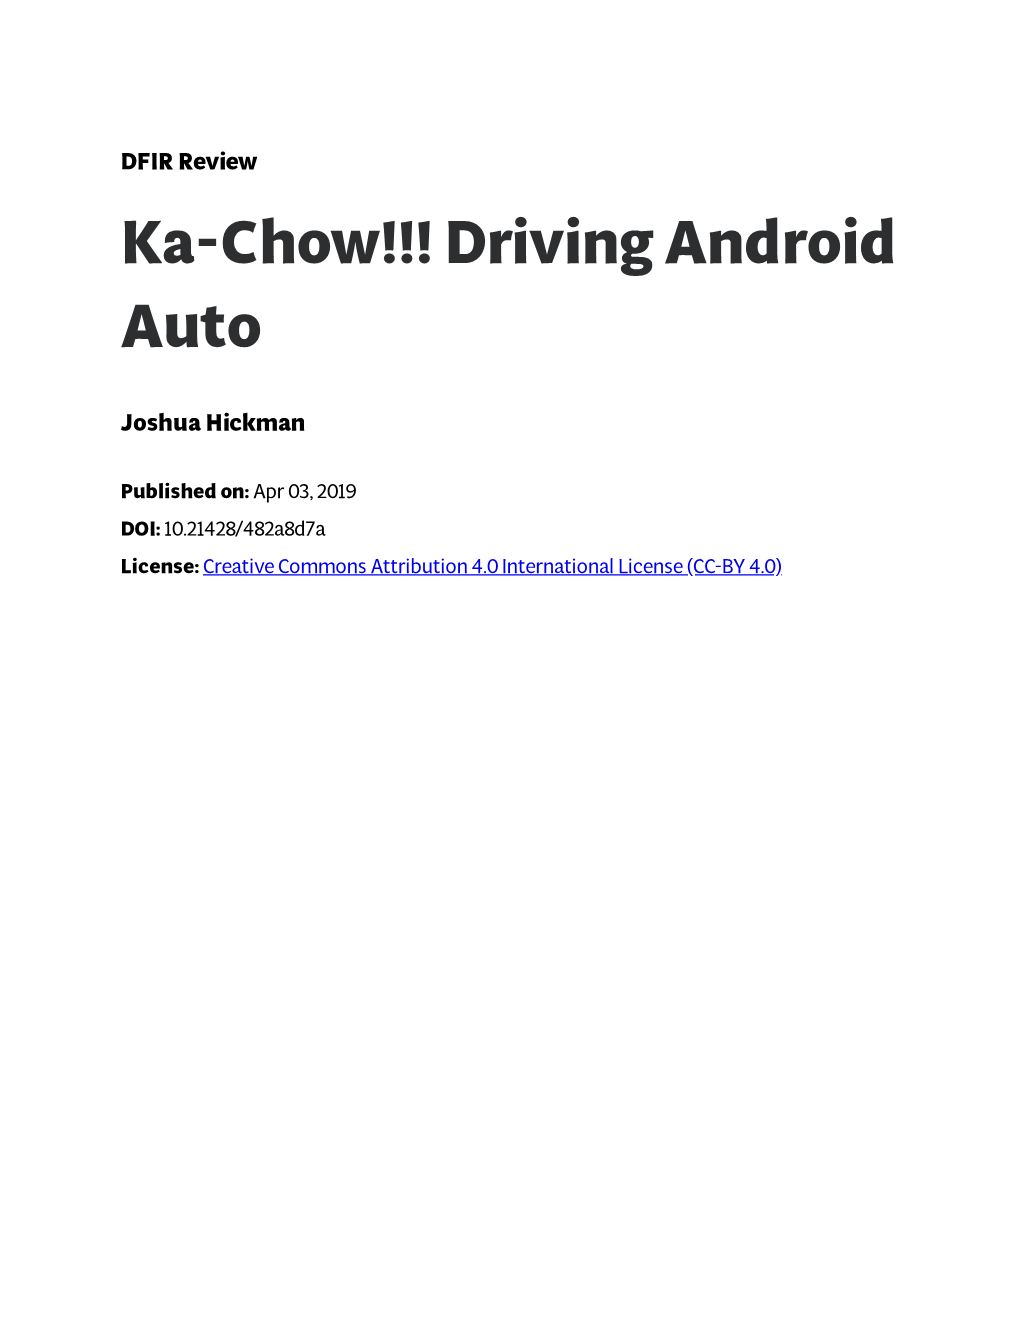 Driving Android Auto